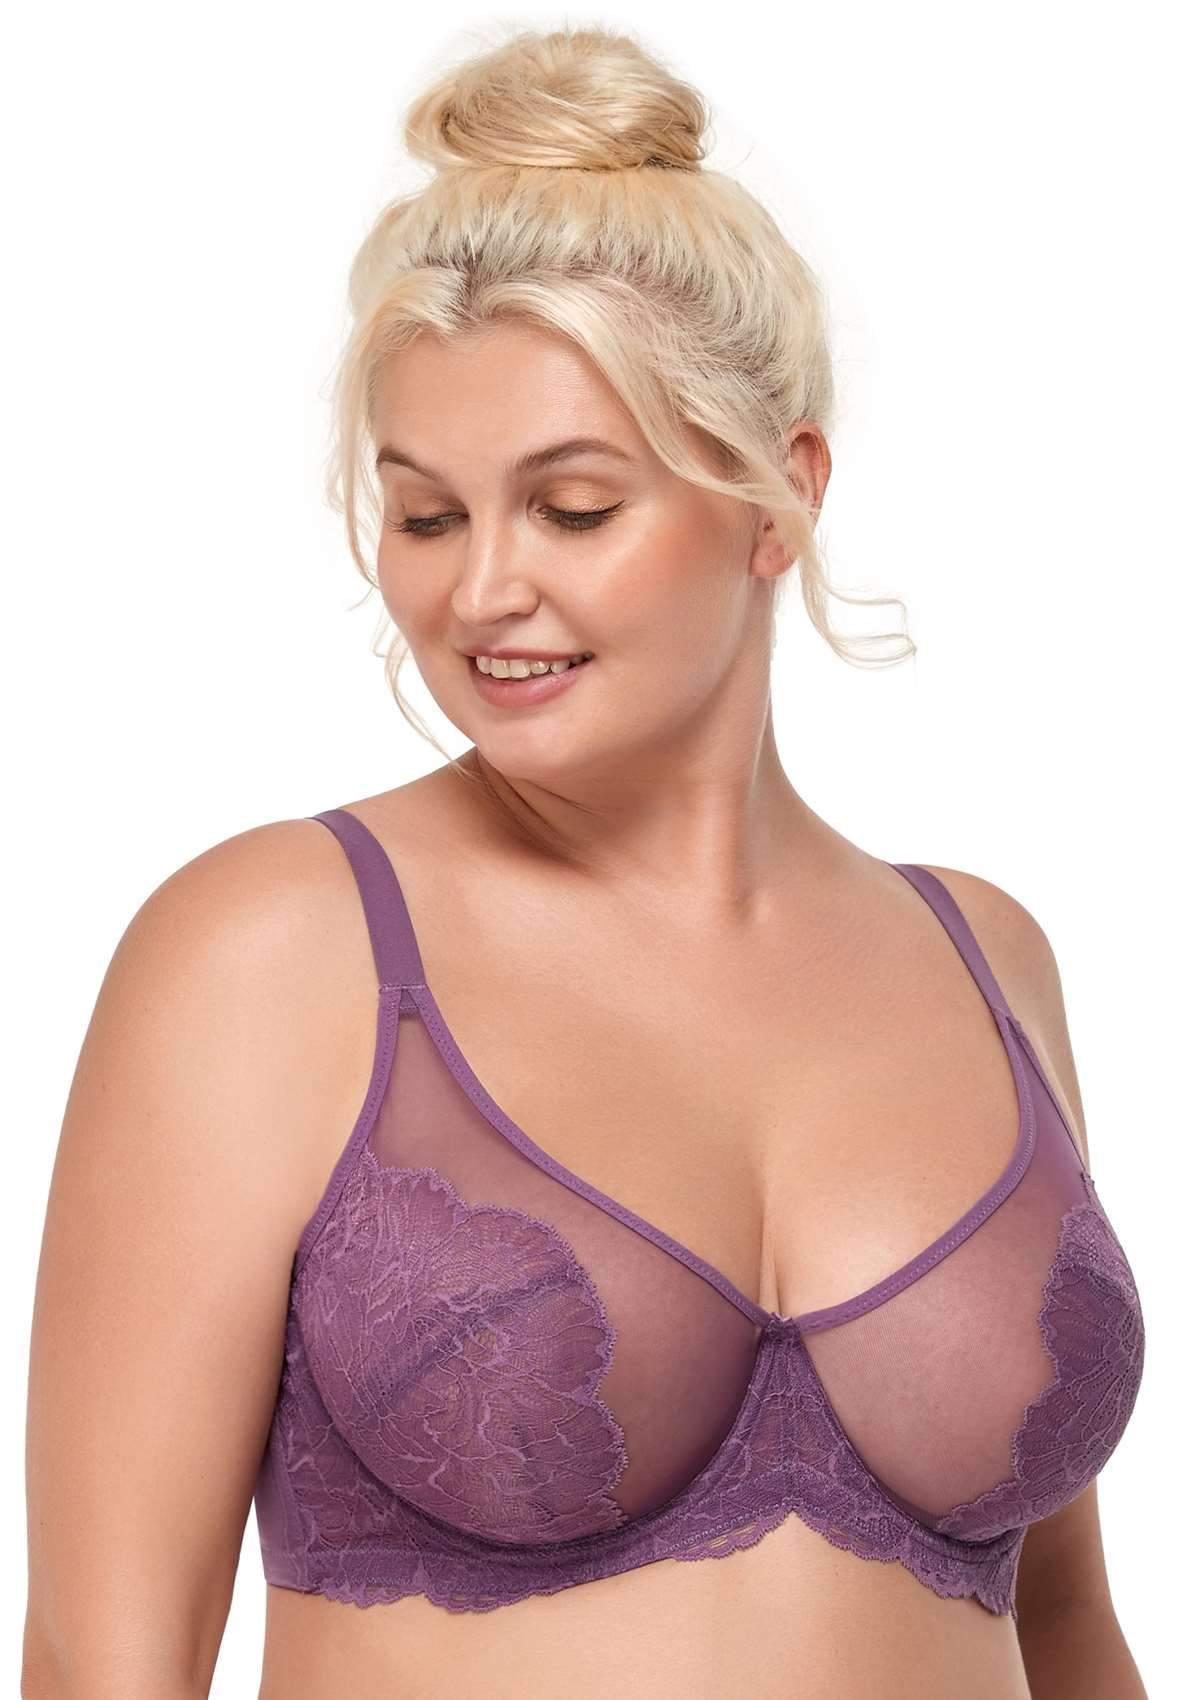 HSIA Blossom Transparent Lace Bra: Plus Size Wired Back Smoothing Bra - Purple / 36 / D